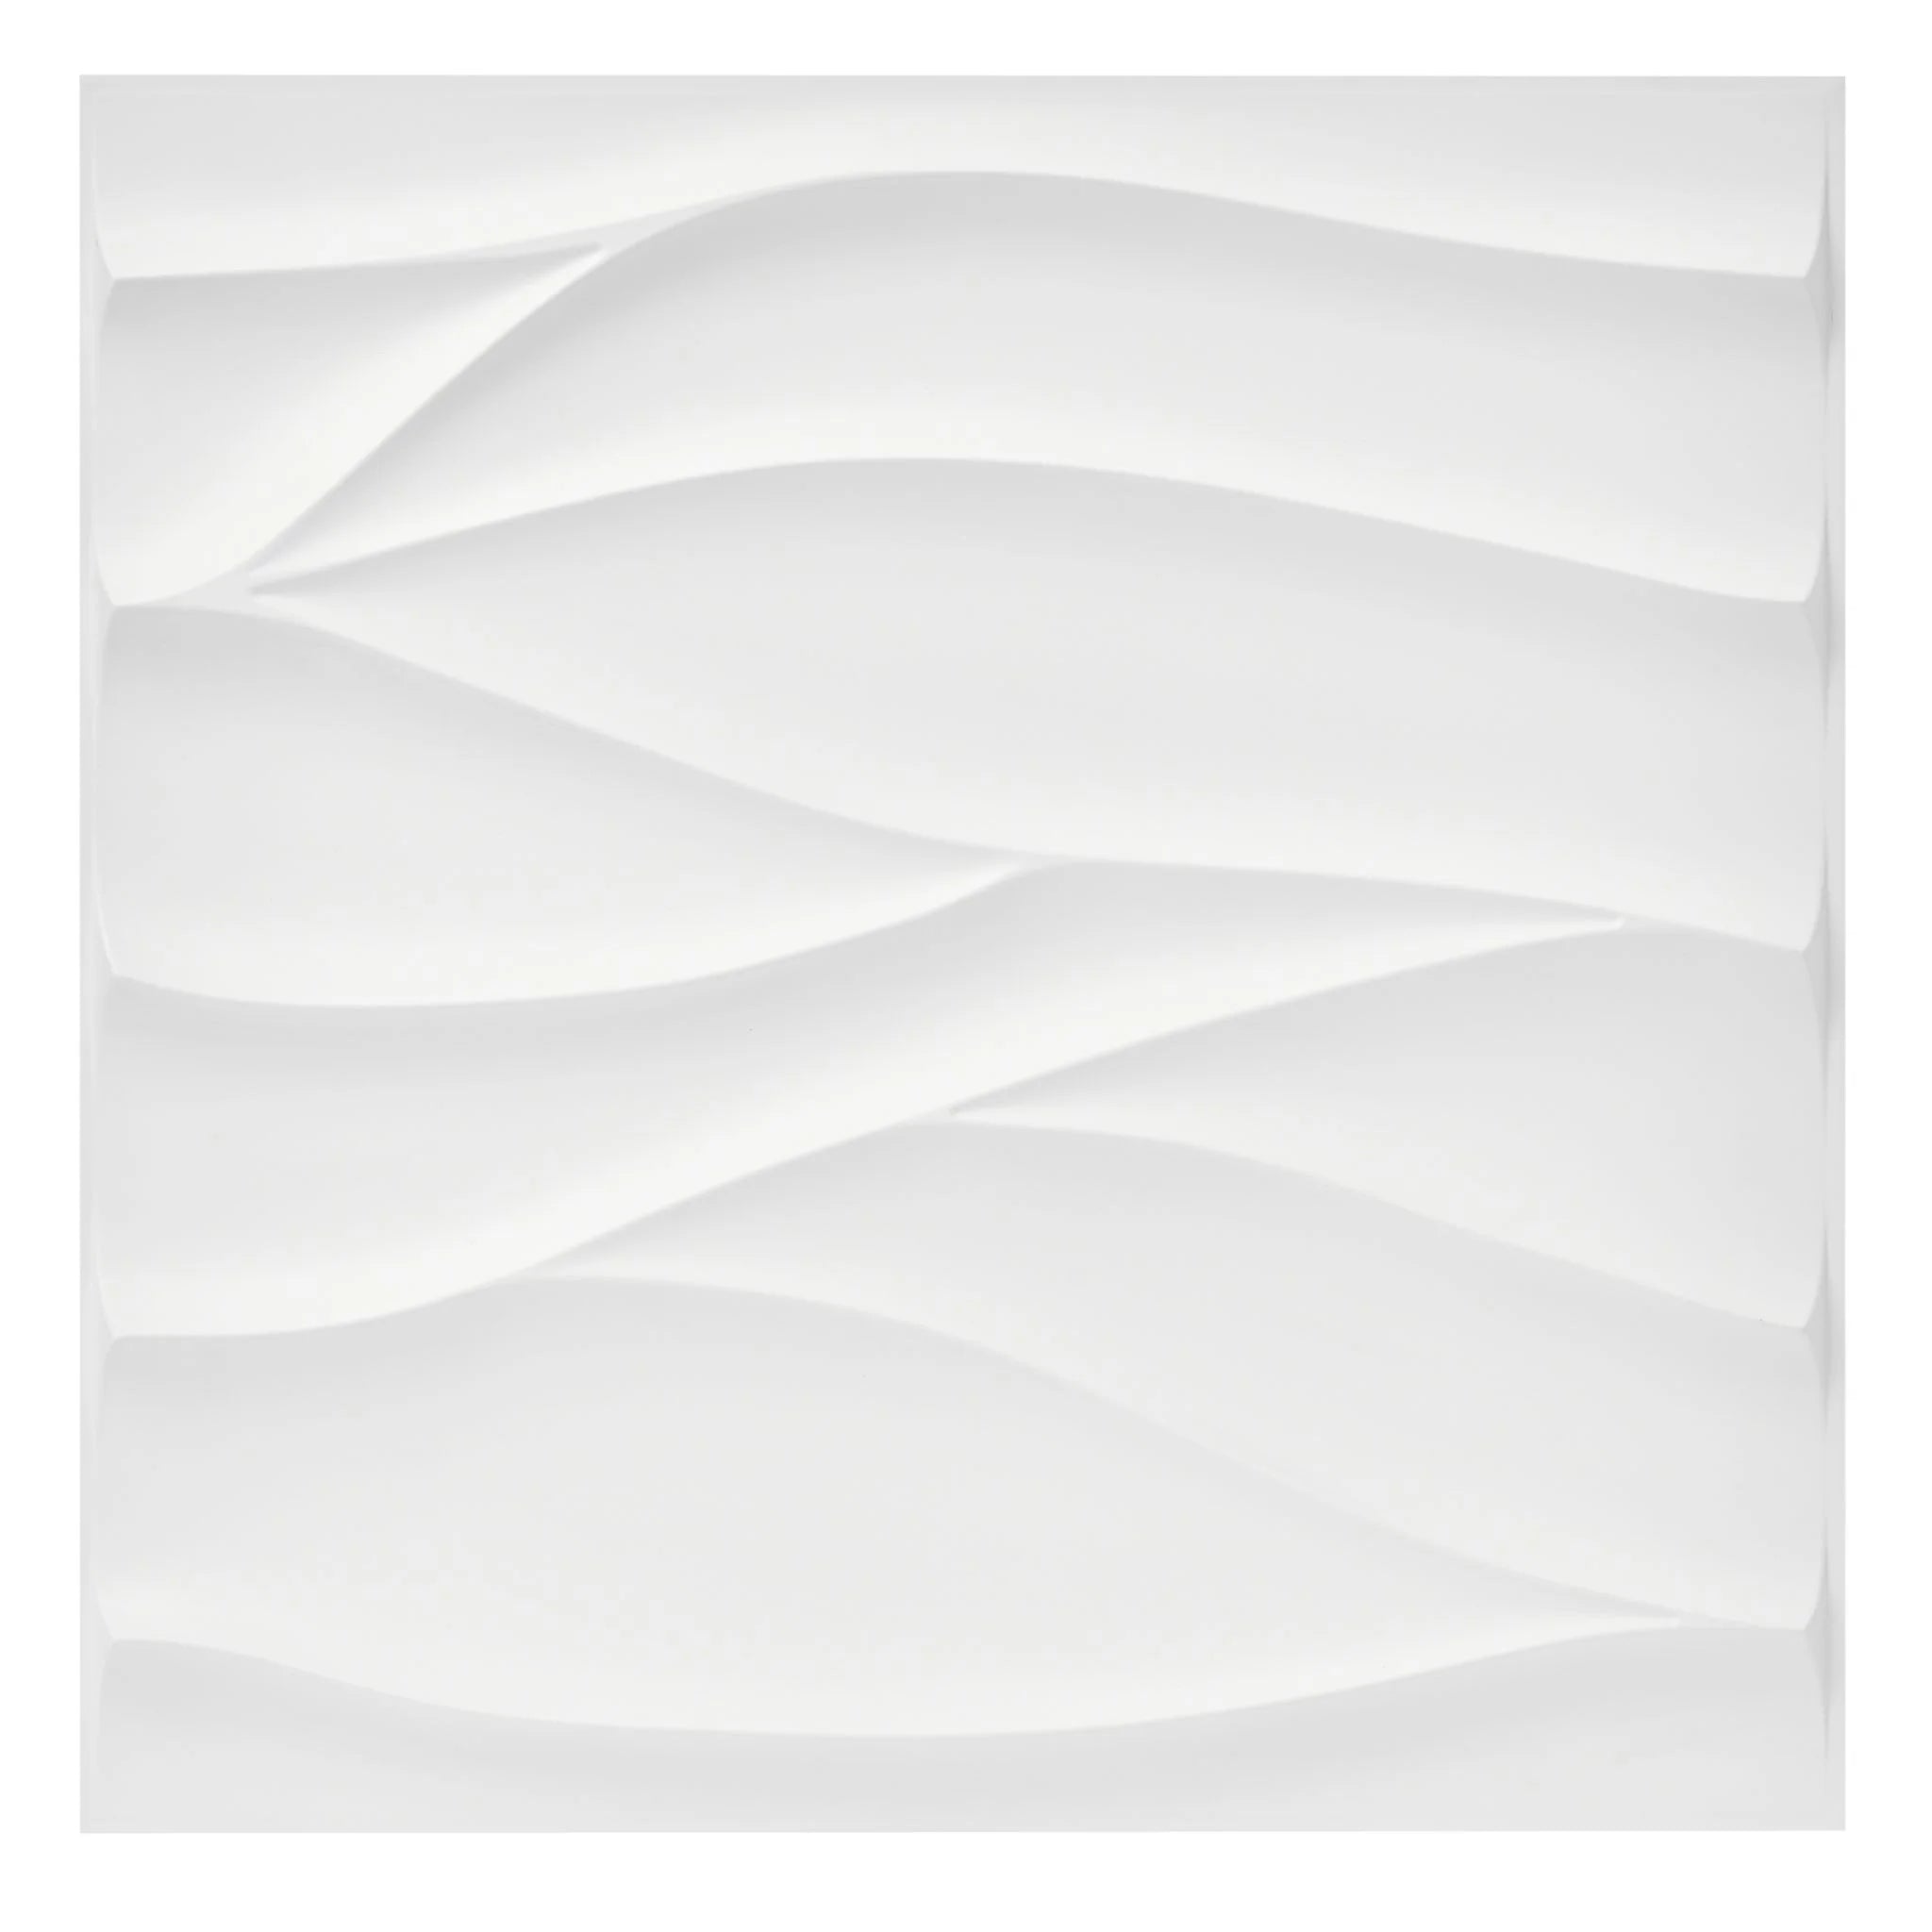 White PVC wall panel with wavy patterns, close-up view